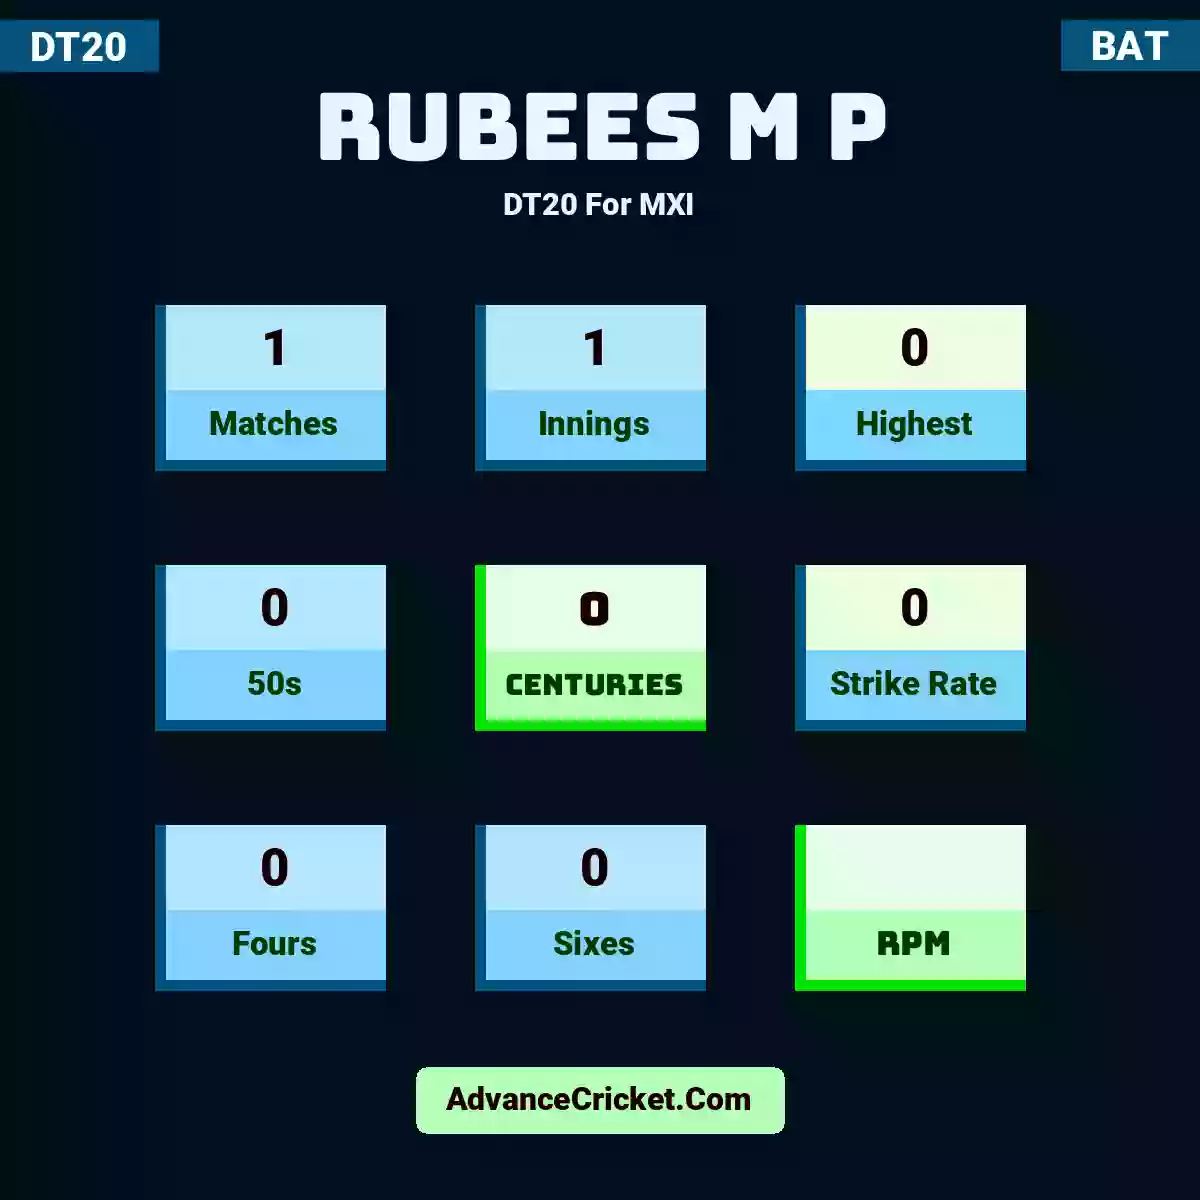 Rubees M P DT20  For MXI, Rubees M P played 1 matches, scored 0 runs as highest, 0 half-centuries, and 0 centuries, with a strike rate of 0. R.M.P hit 0 fours and 0 sixes.